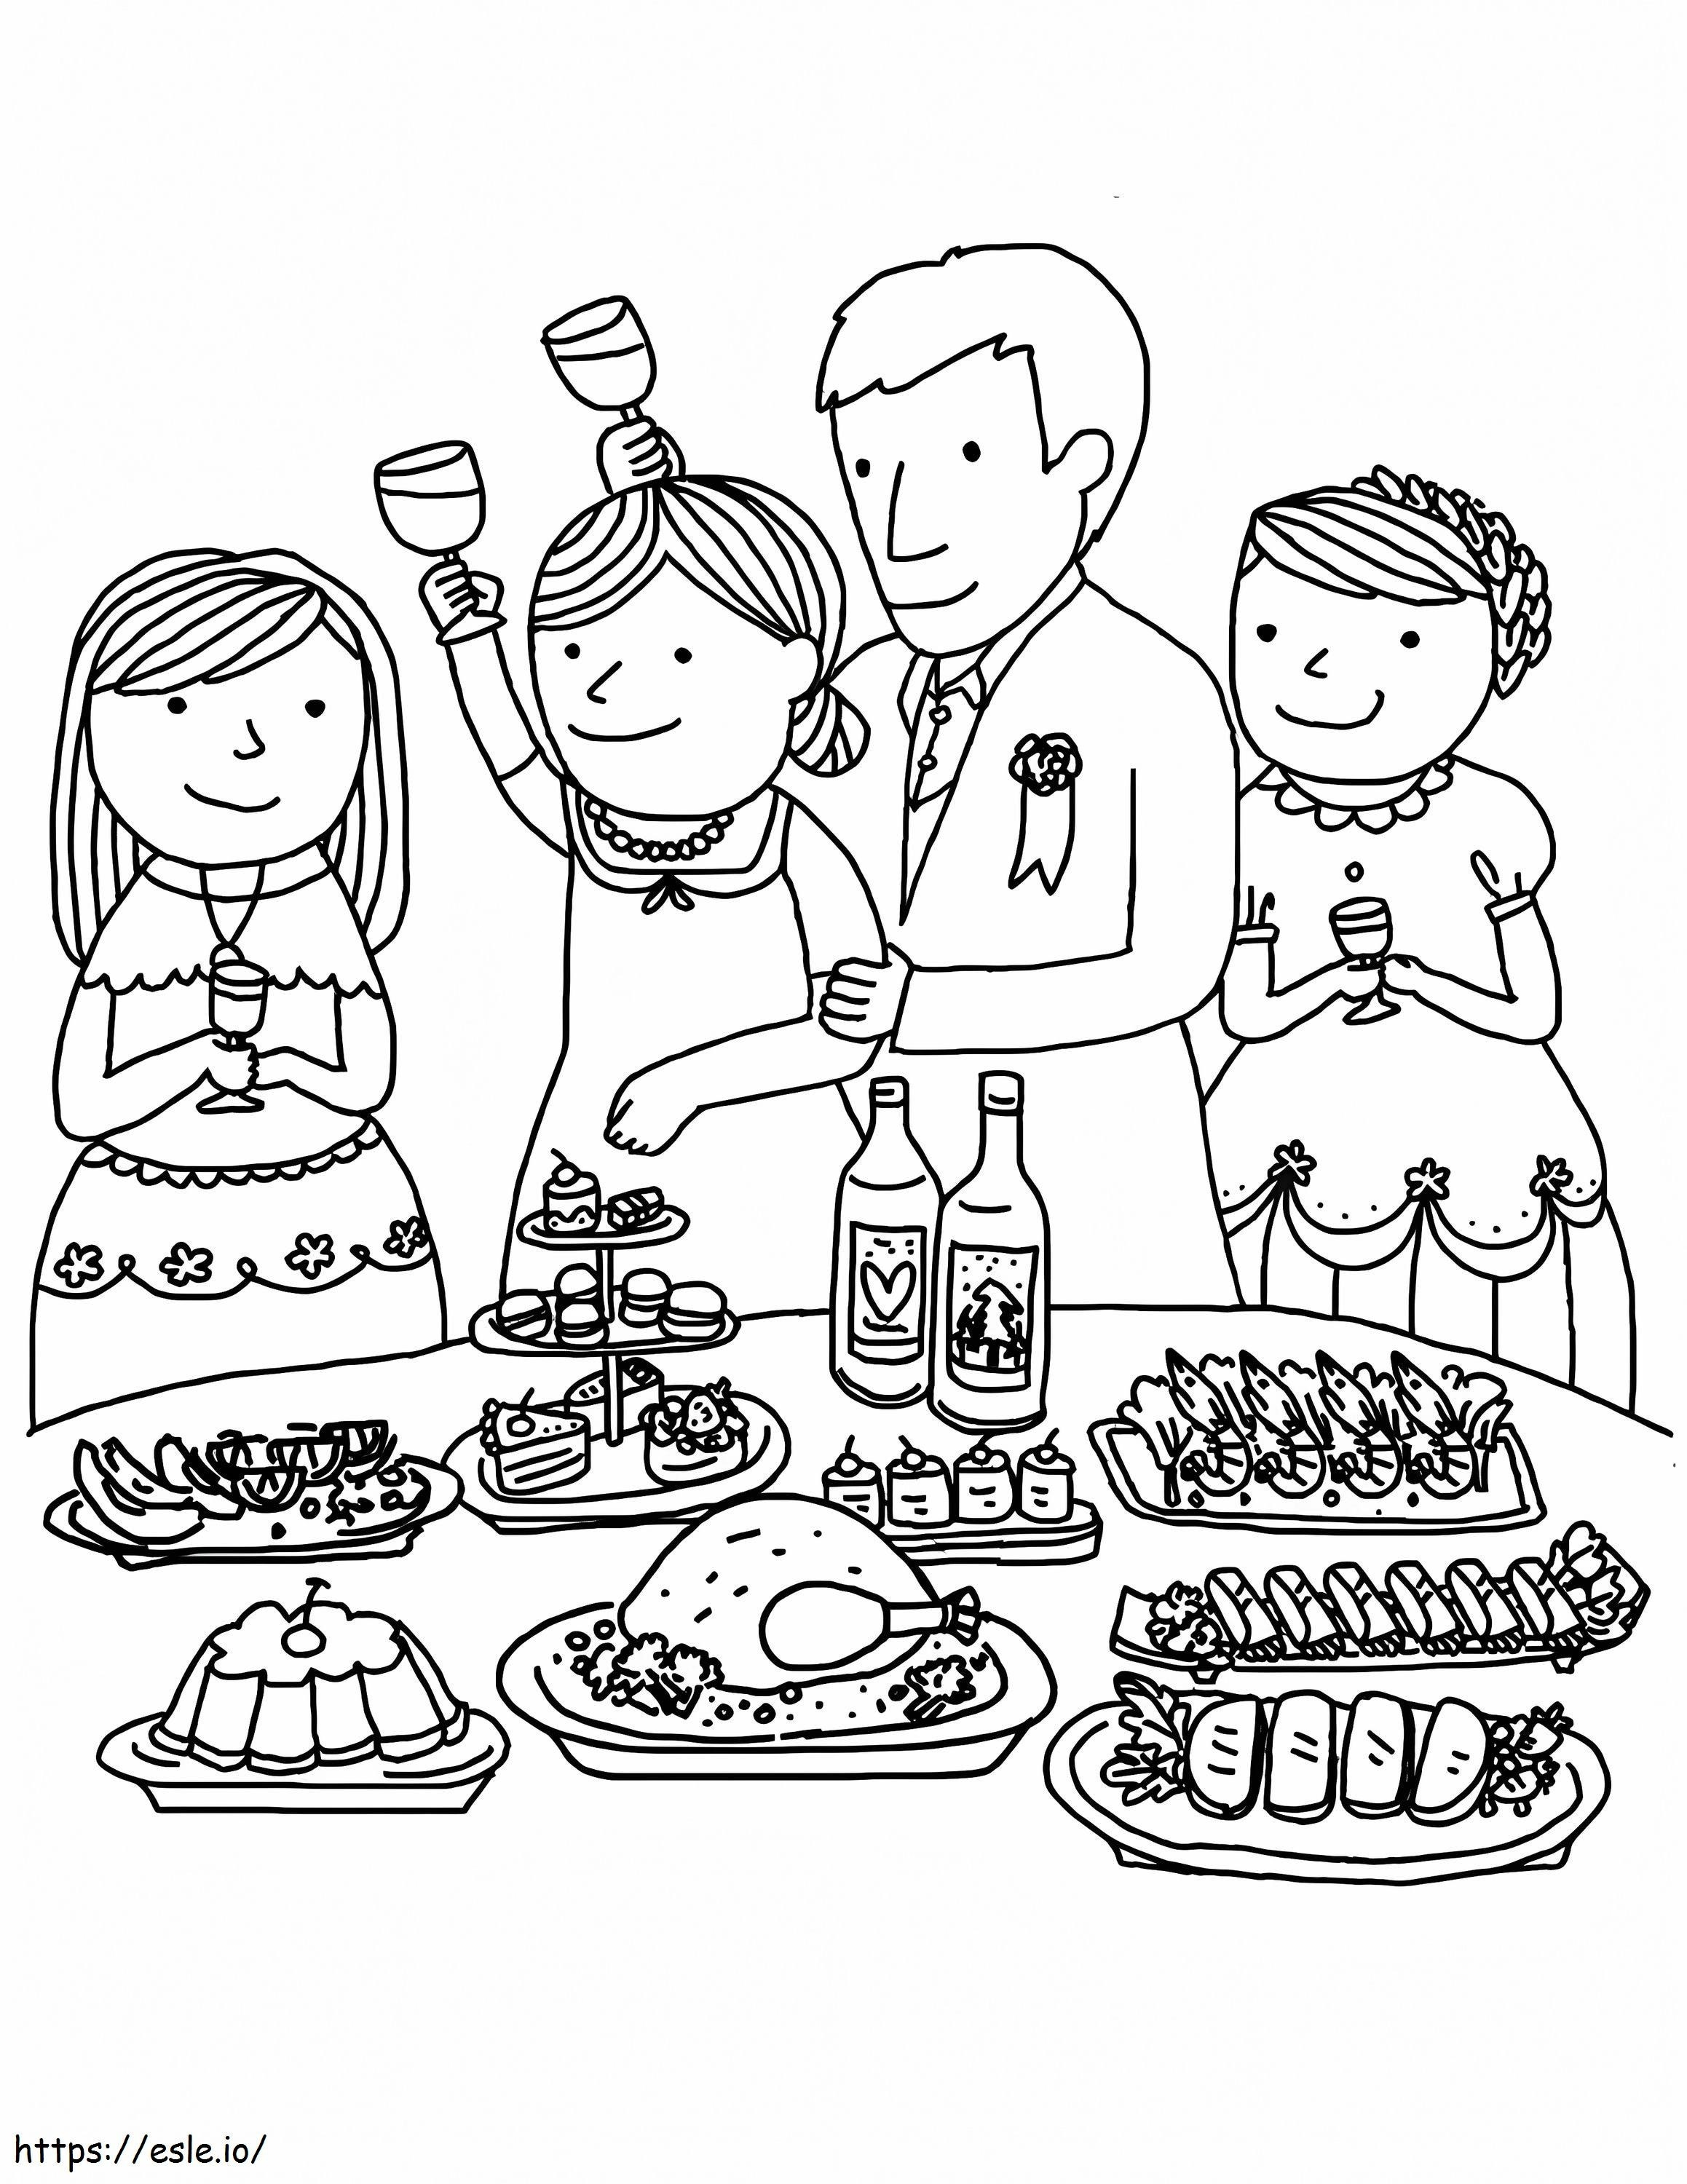 1588579033 4438271377 Df65Bed84A B coloring page